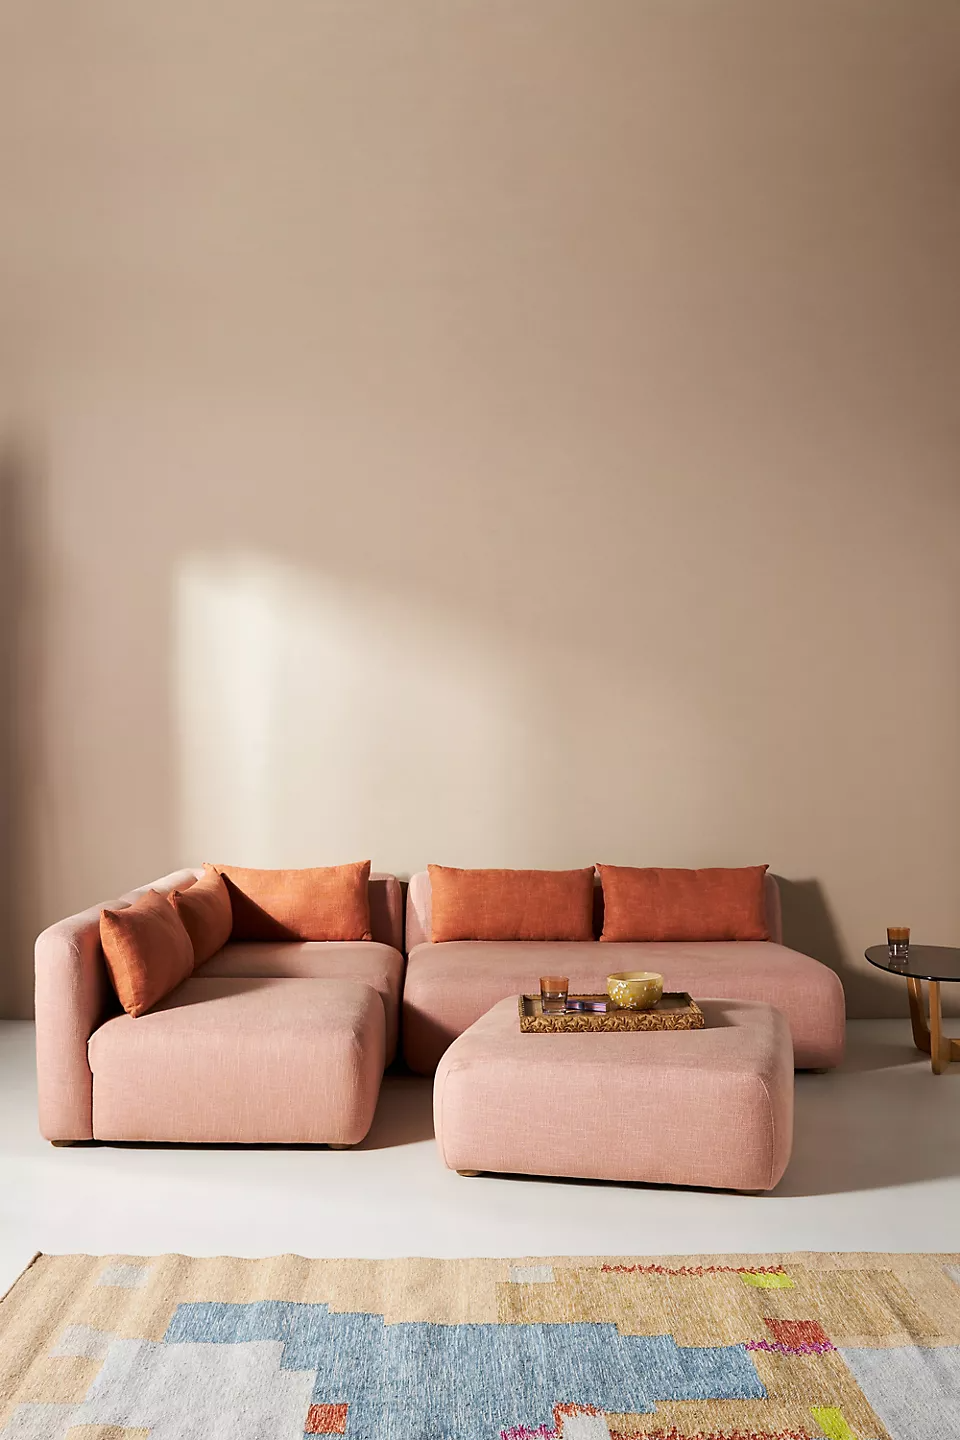 Maximize Comfort and Versatility with Armless Sectional Sofas